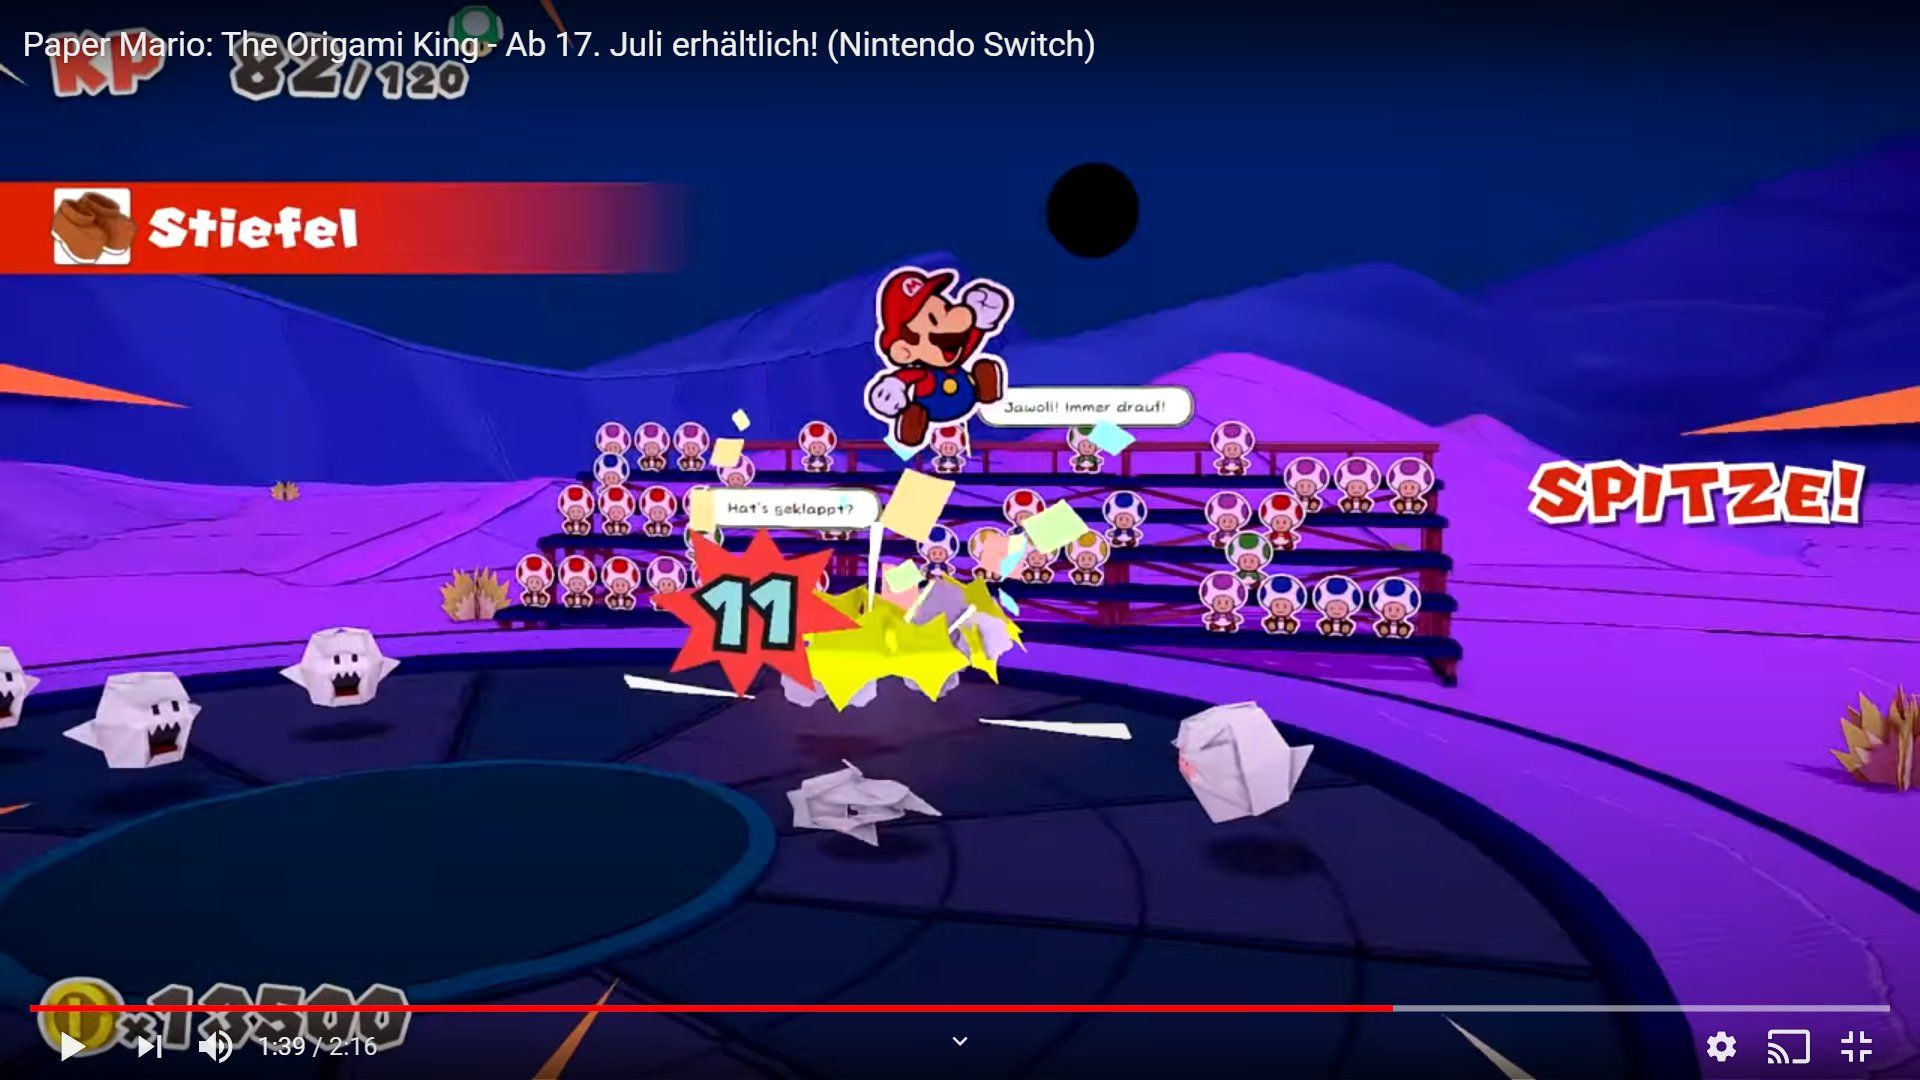 The new Paper Mario TOK battle systems makes it so Boos behind you